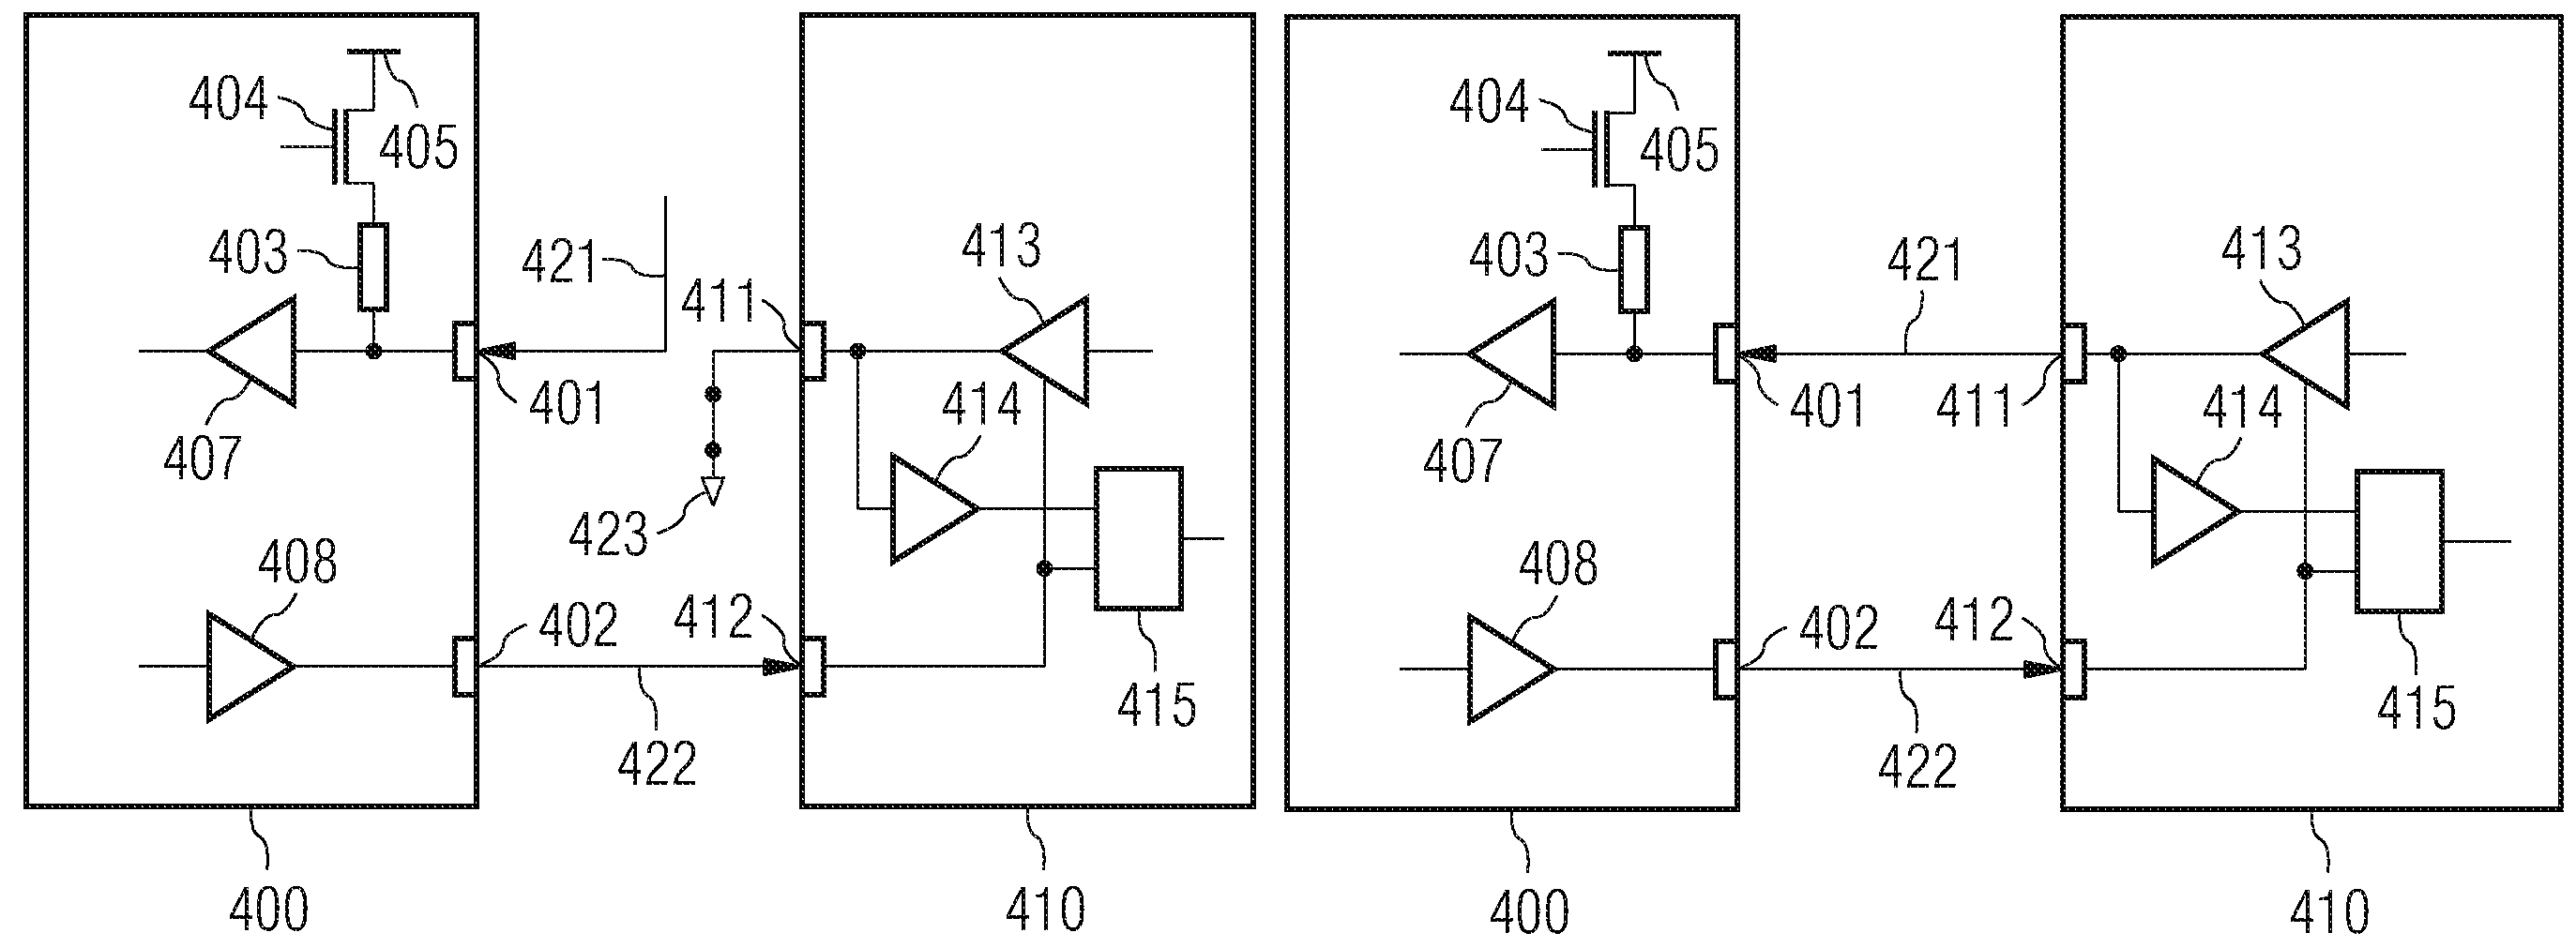 Evaluation unit in an integrated circuit